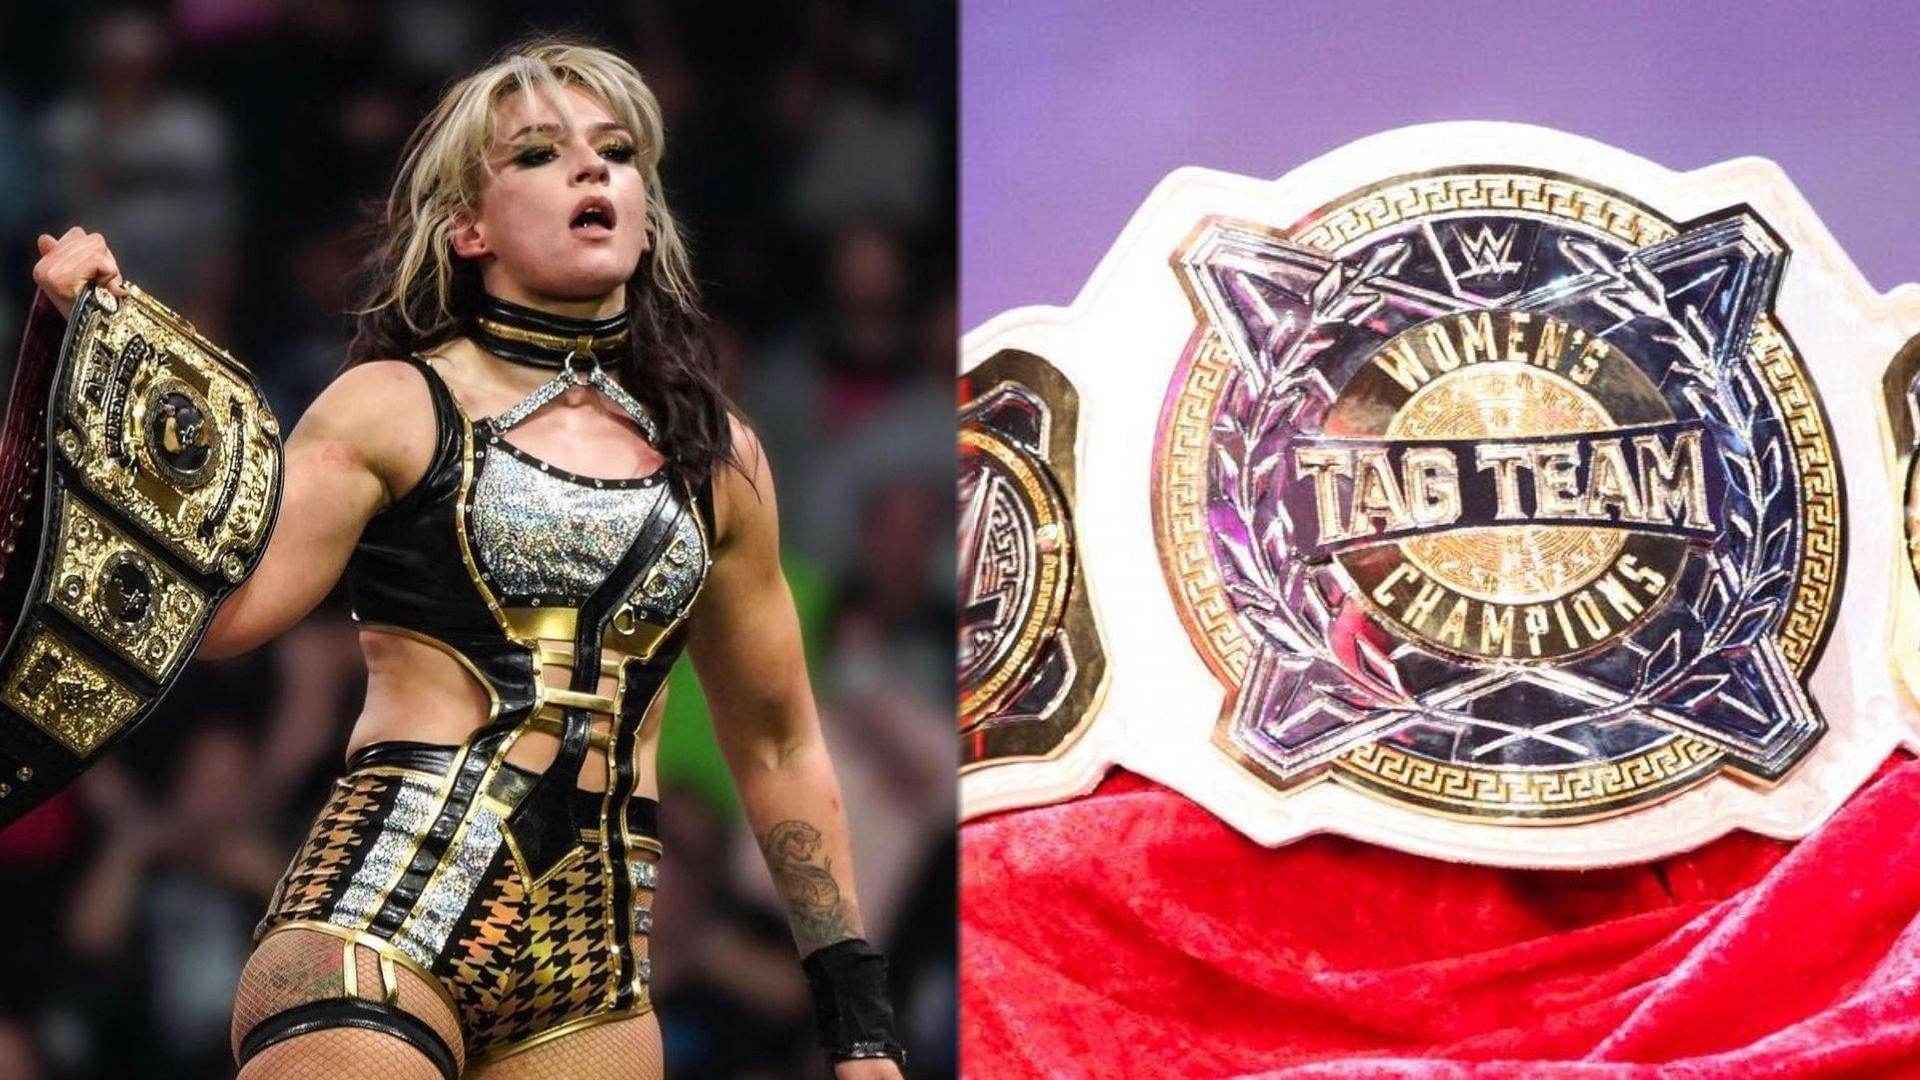 Could Jamie Hayter defeat this former WWE Superstar?